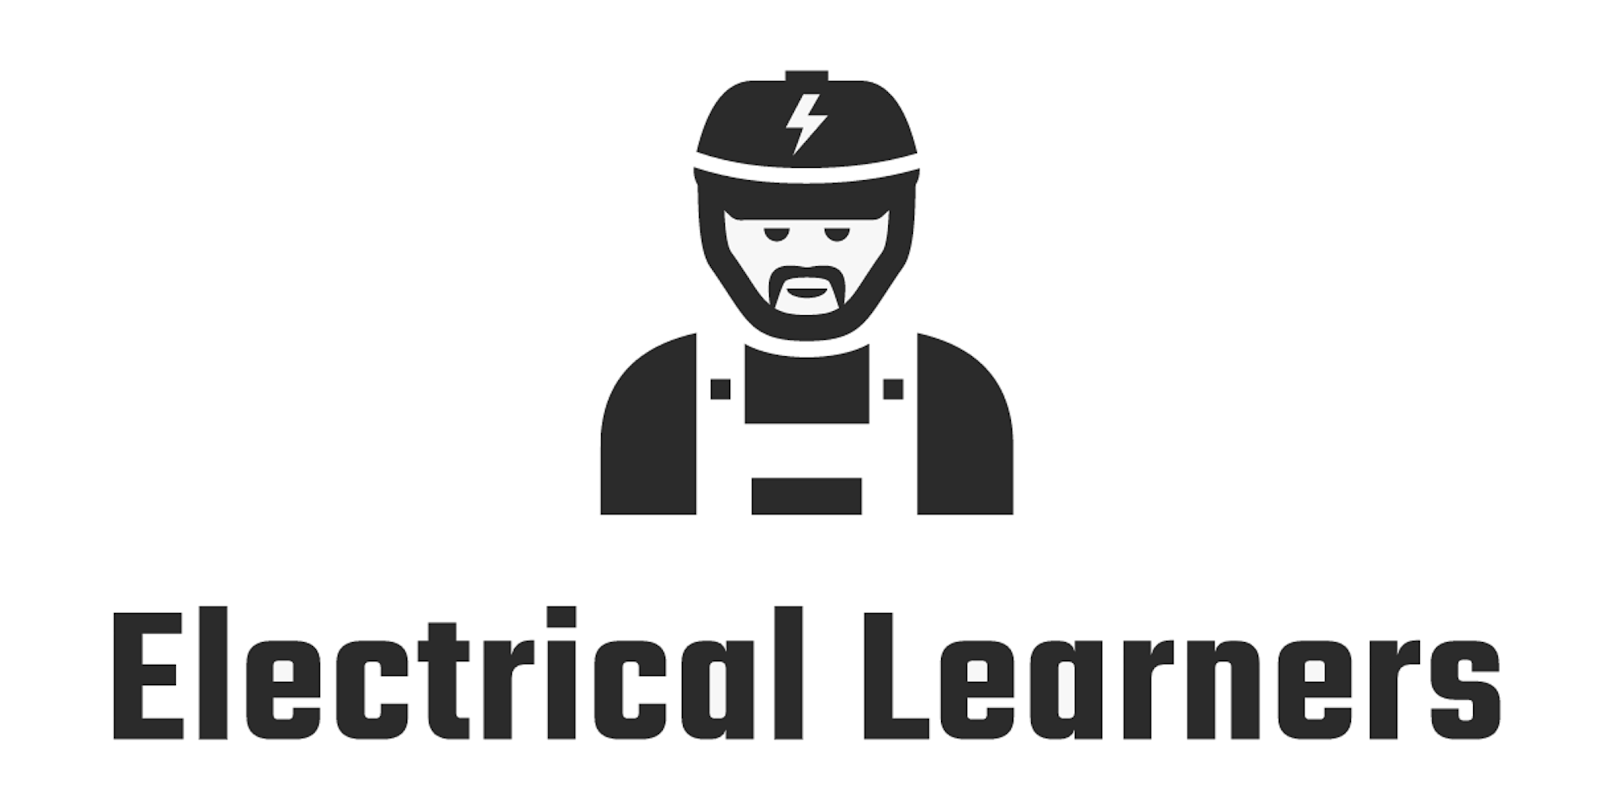 Electrical Learners